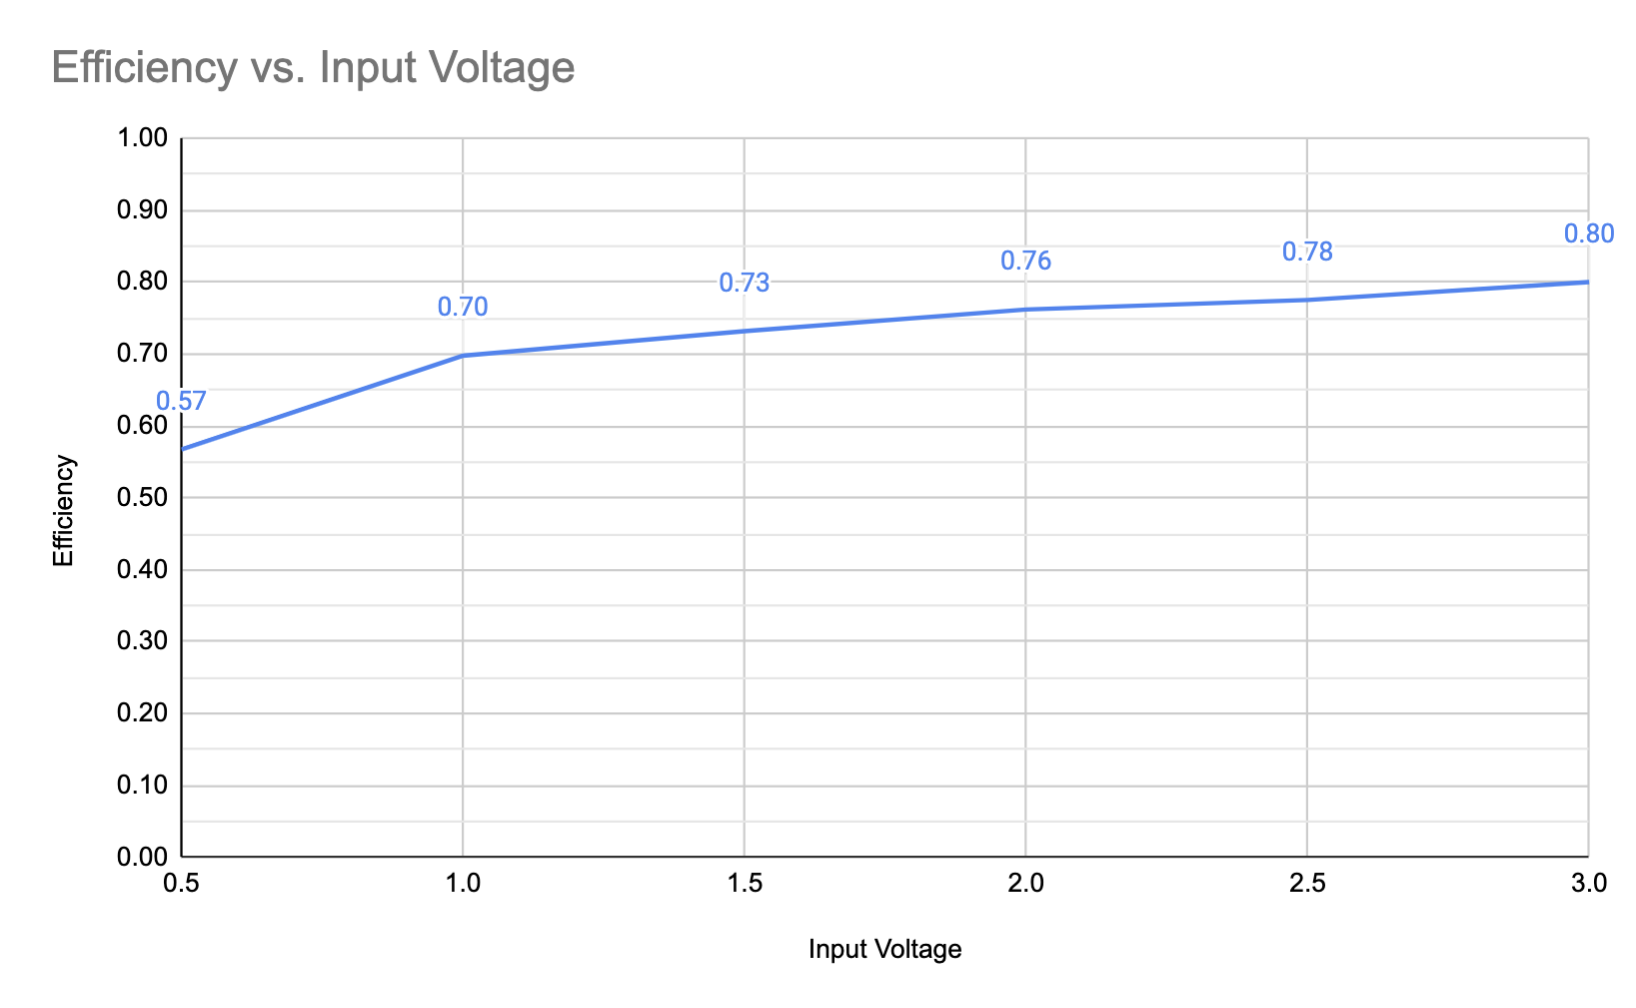 Efficiency at 4V for various input voltages